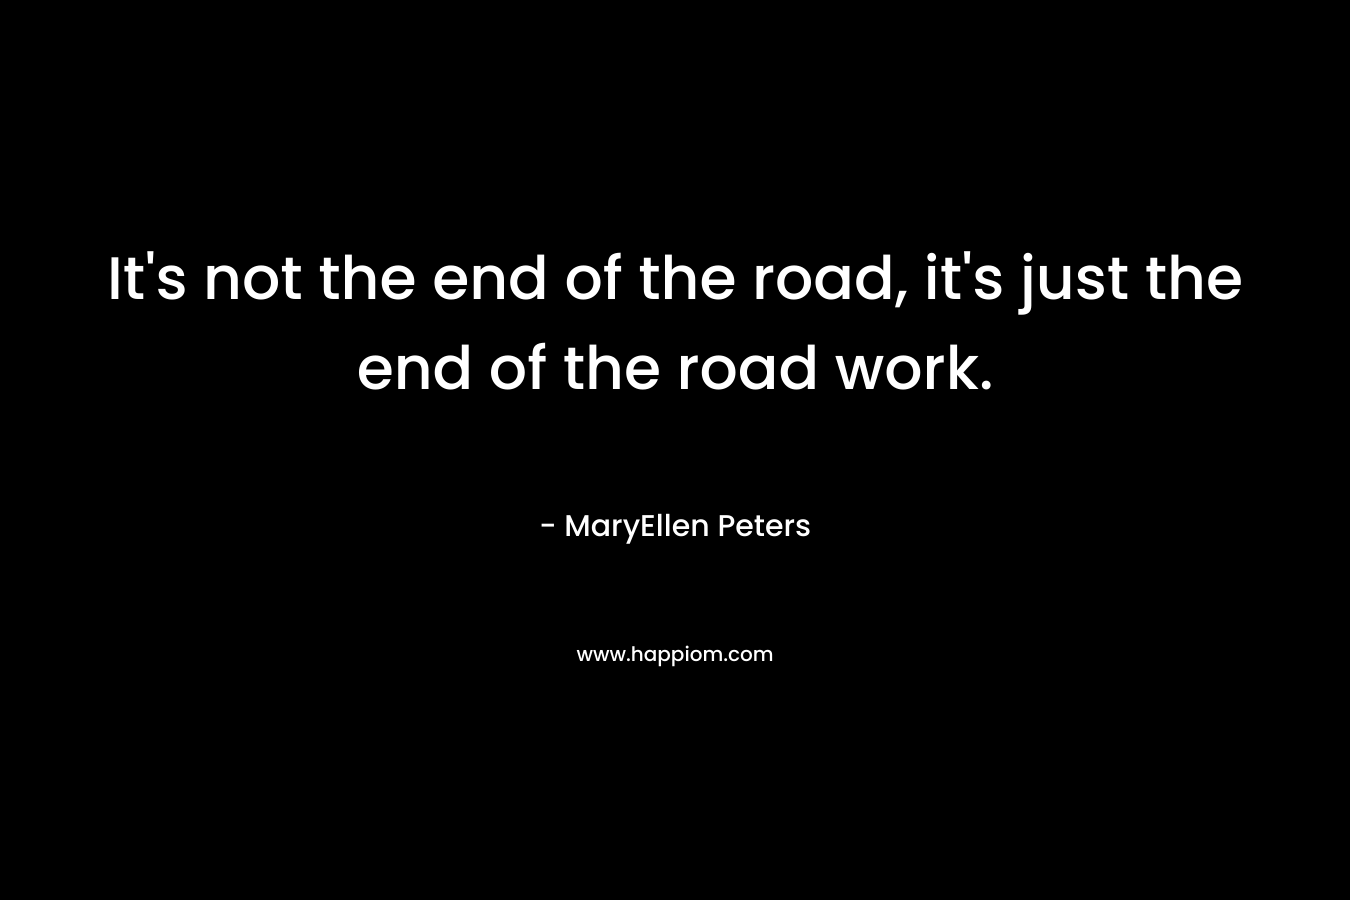 It's not the end of the road, it's just the end of the road work.